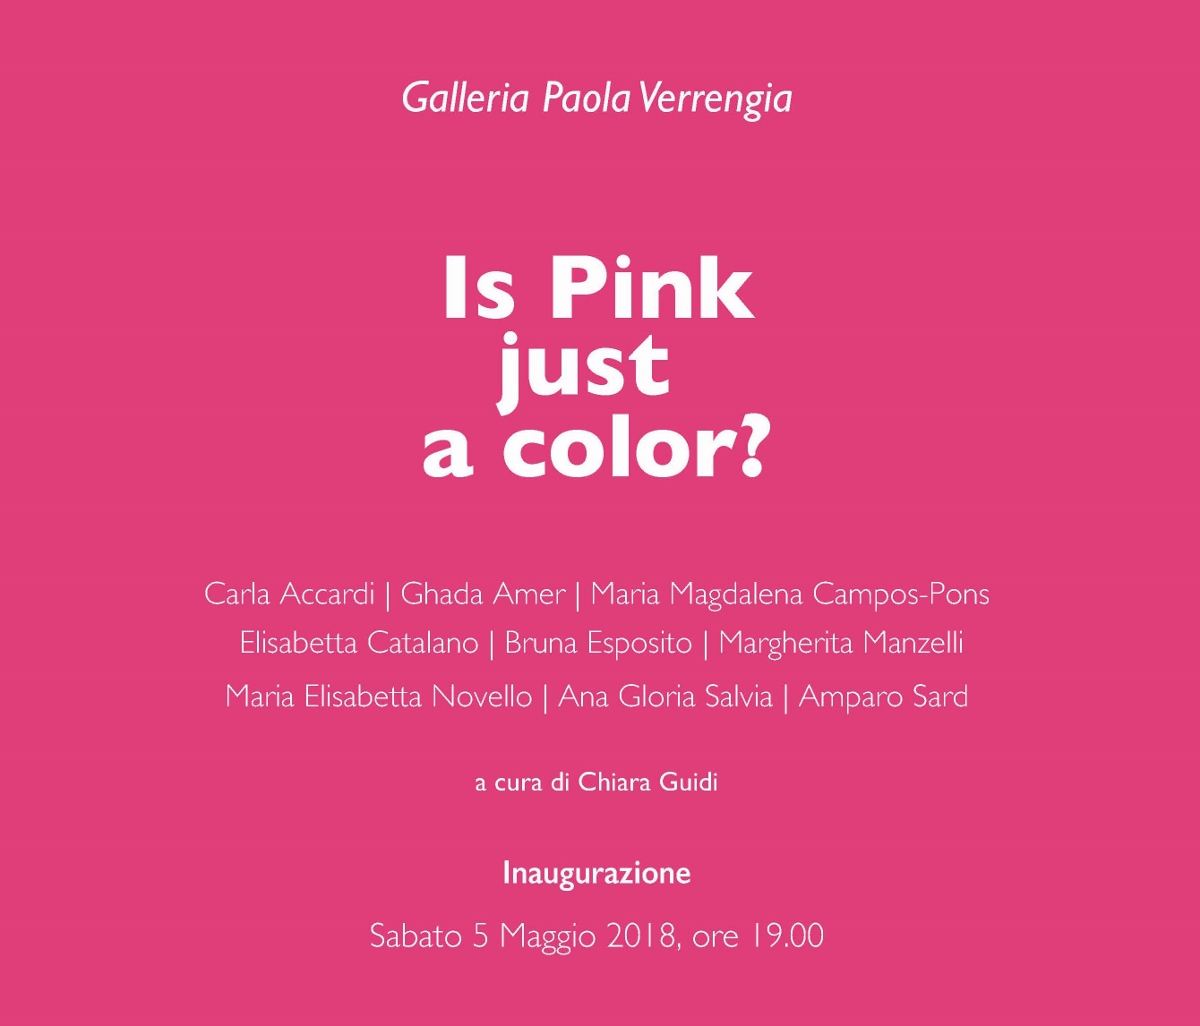 Is Pink just a color?